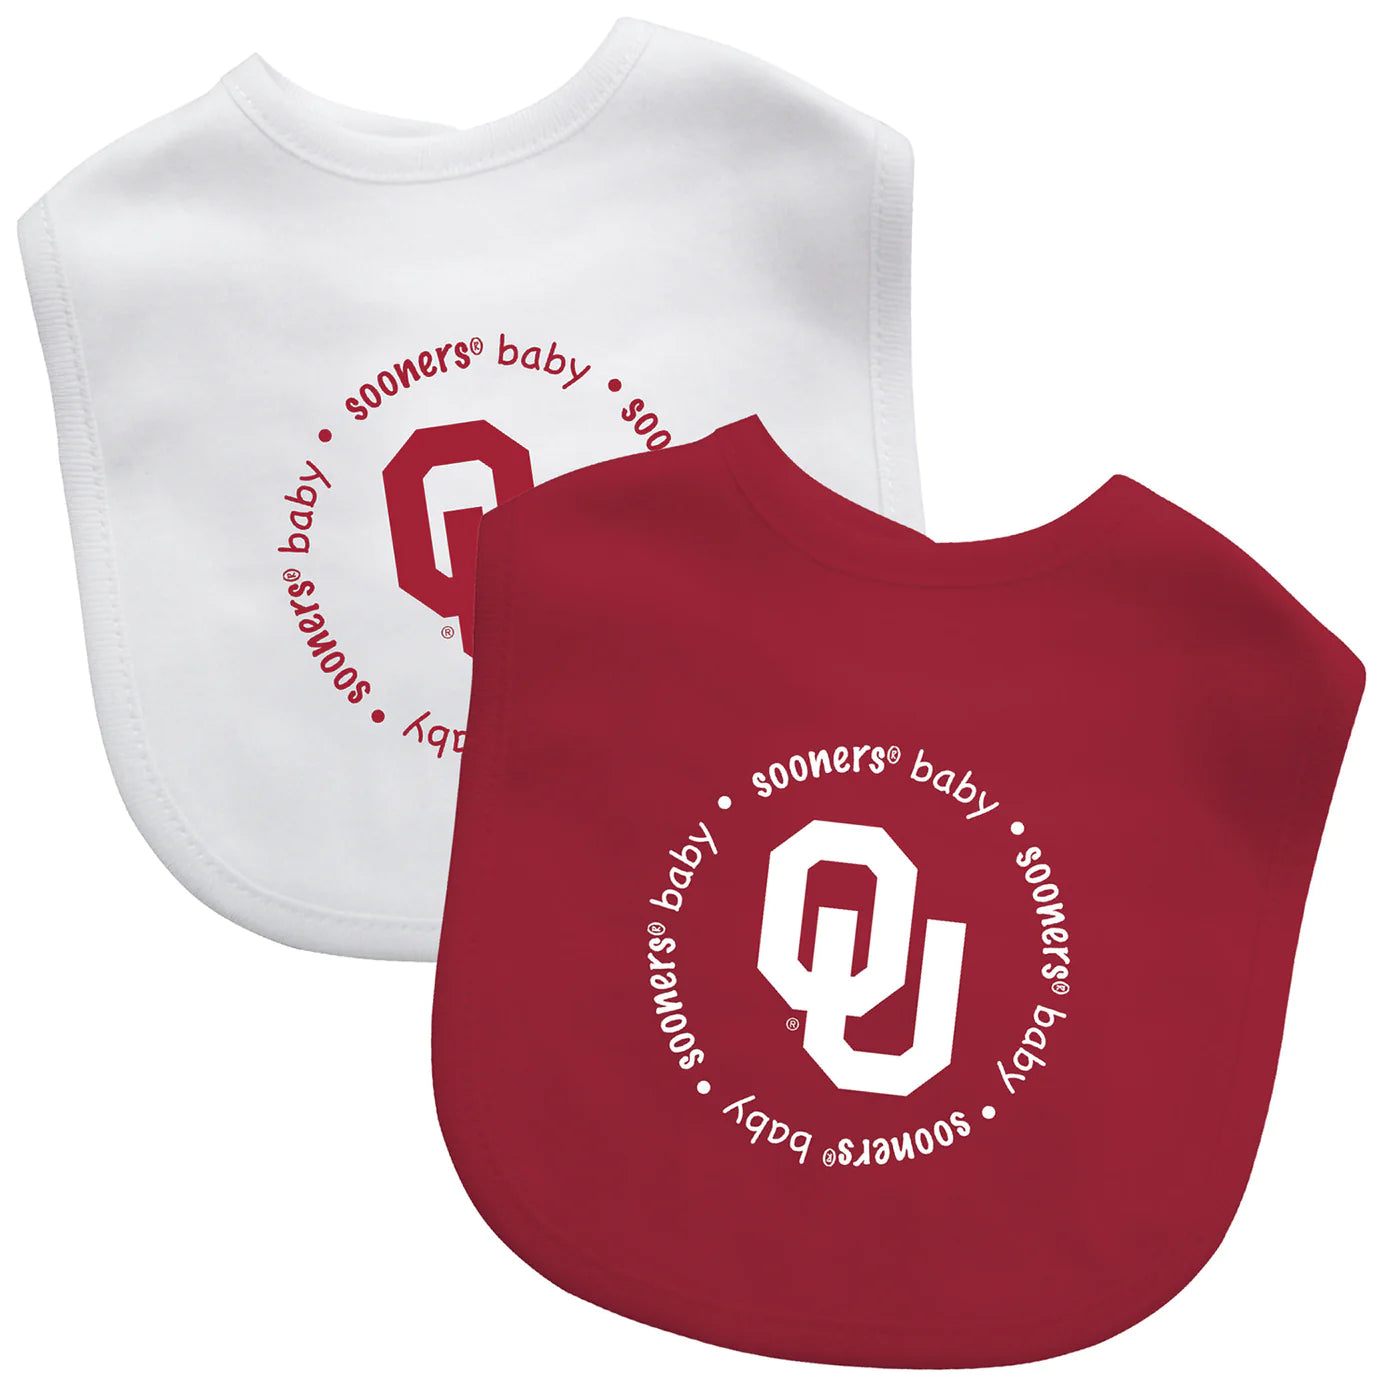 Oklahoma Sooners - Embroidered Baby Bibs 2-Pack by Baby Fanatic